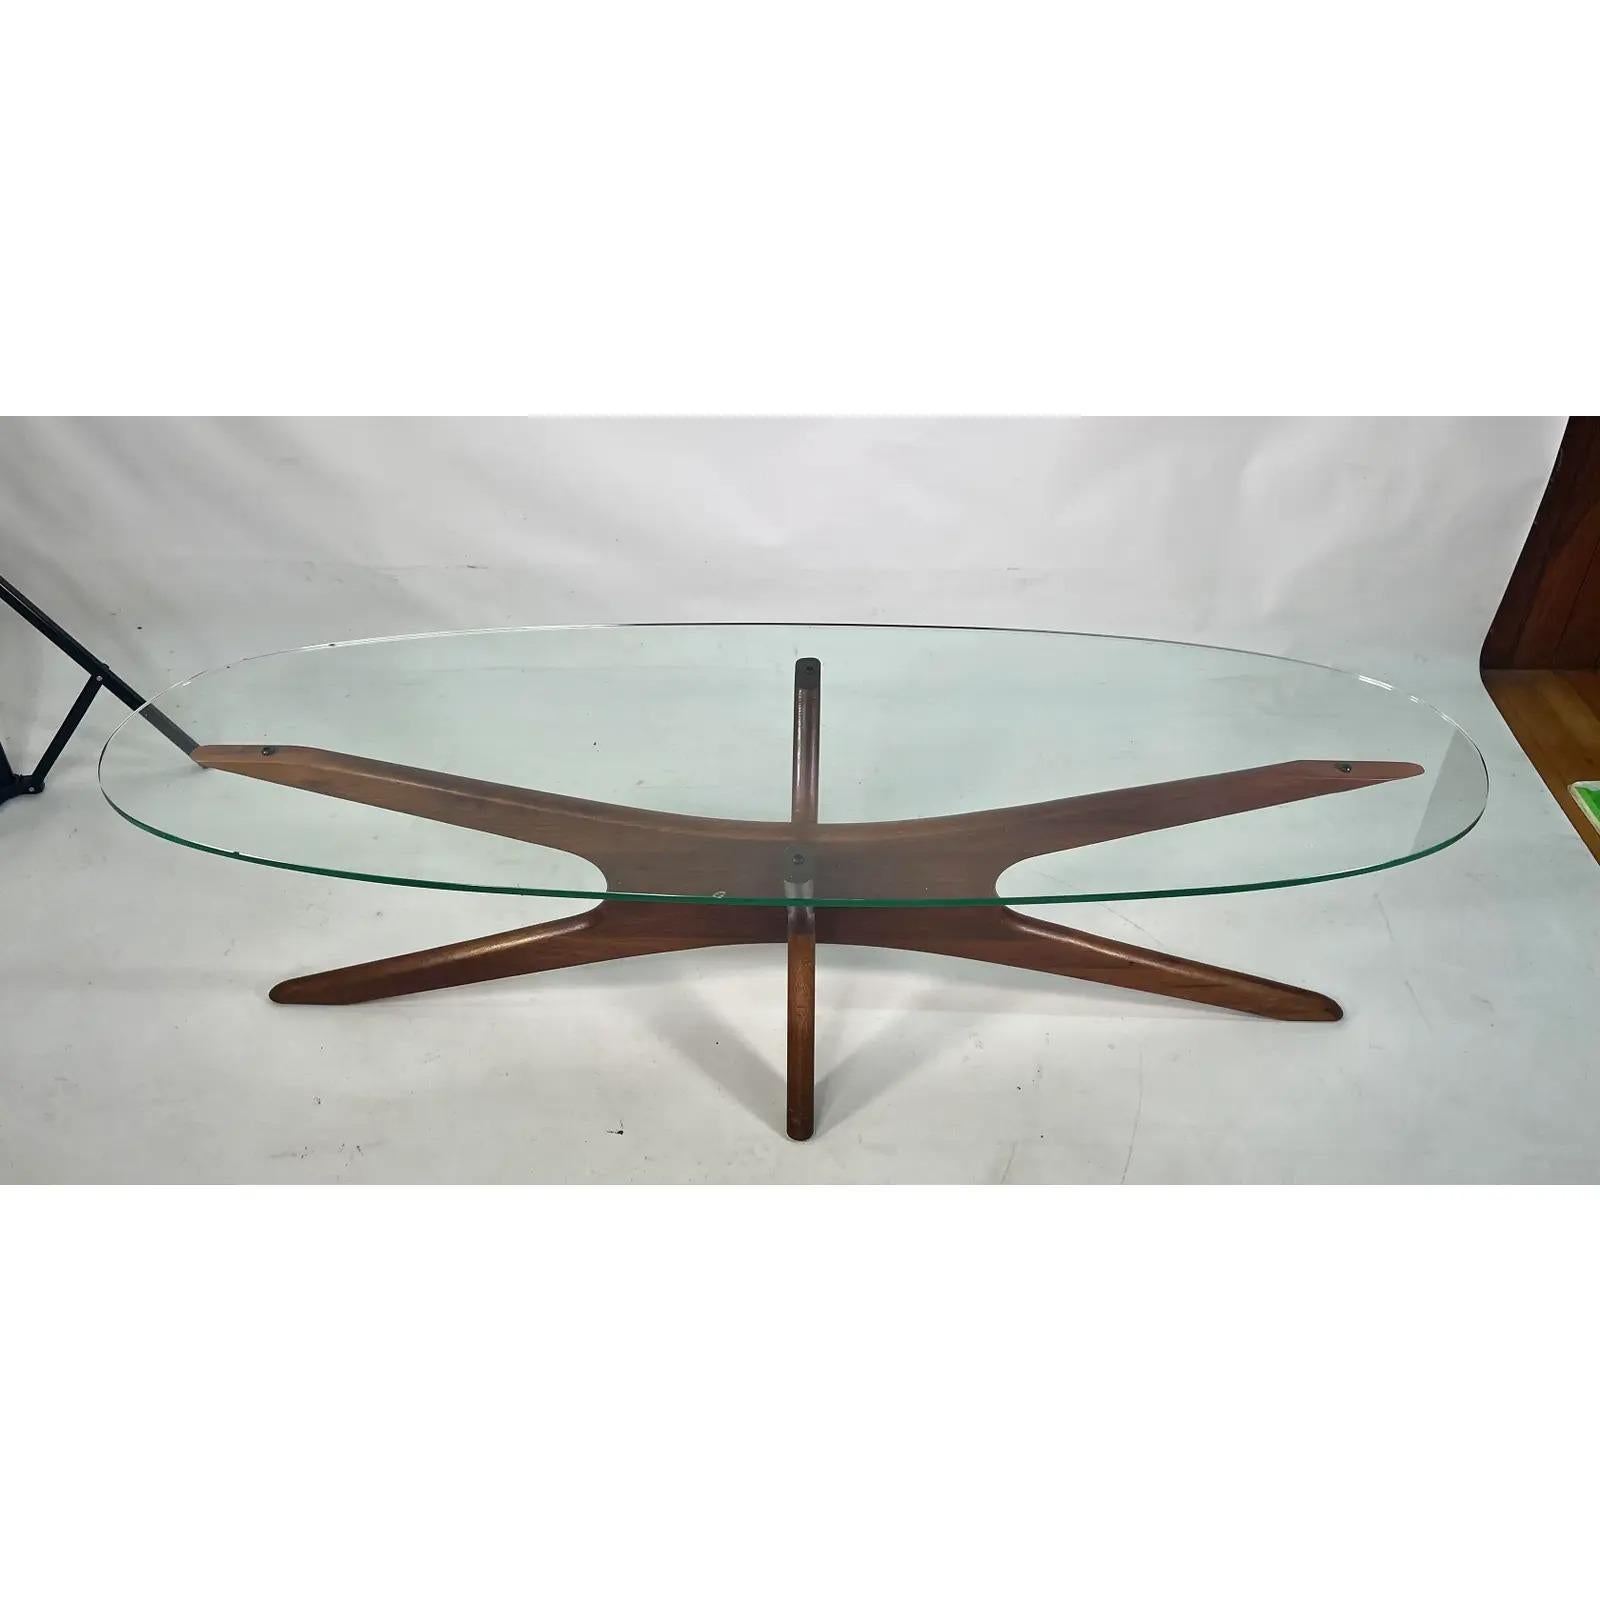 This Adrian Pearsall walnut “Jacks” coffee table is instantly recognizable and at this point iconic. This table is perfect if you’re looking to add a dash of elegance to your home or office.